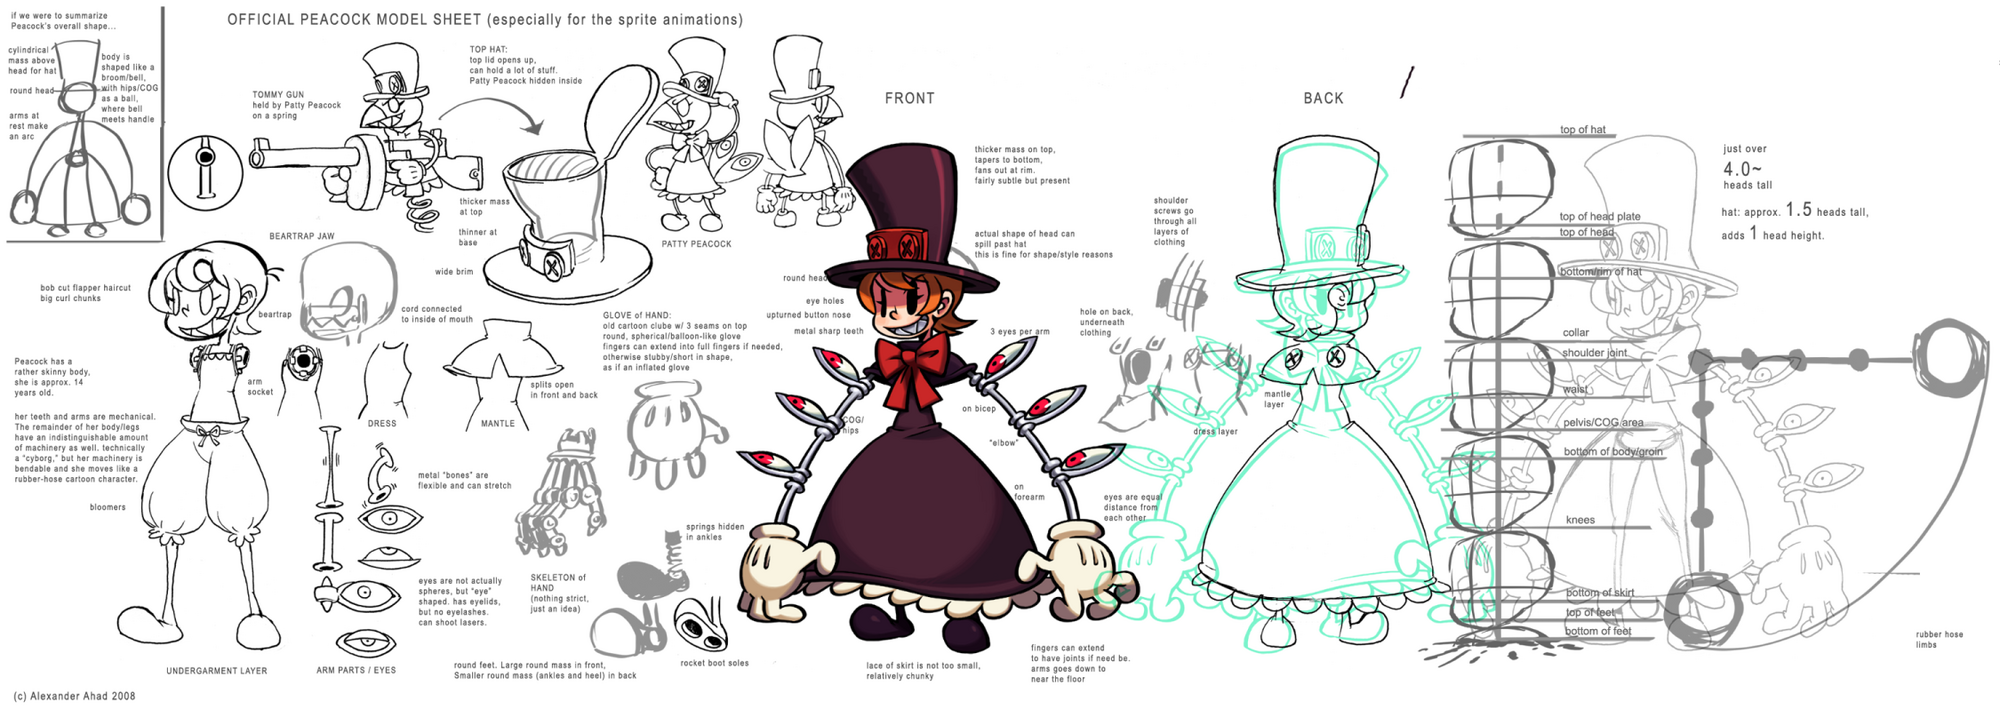 Image Skullgirls Peacock Reference Png Skullgirls Wiki Fandom Powered By Wikia 